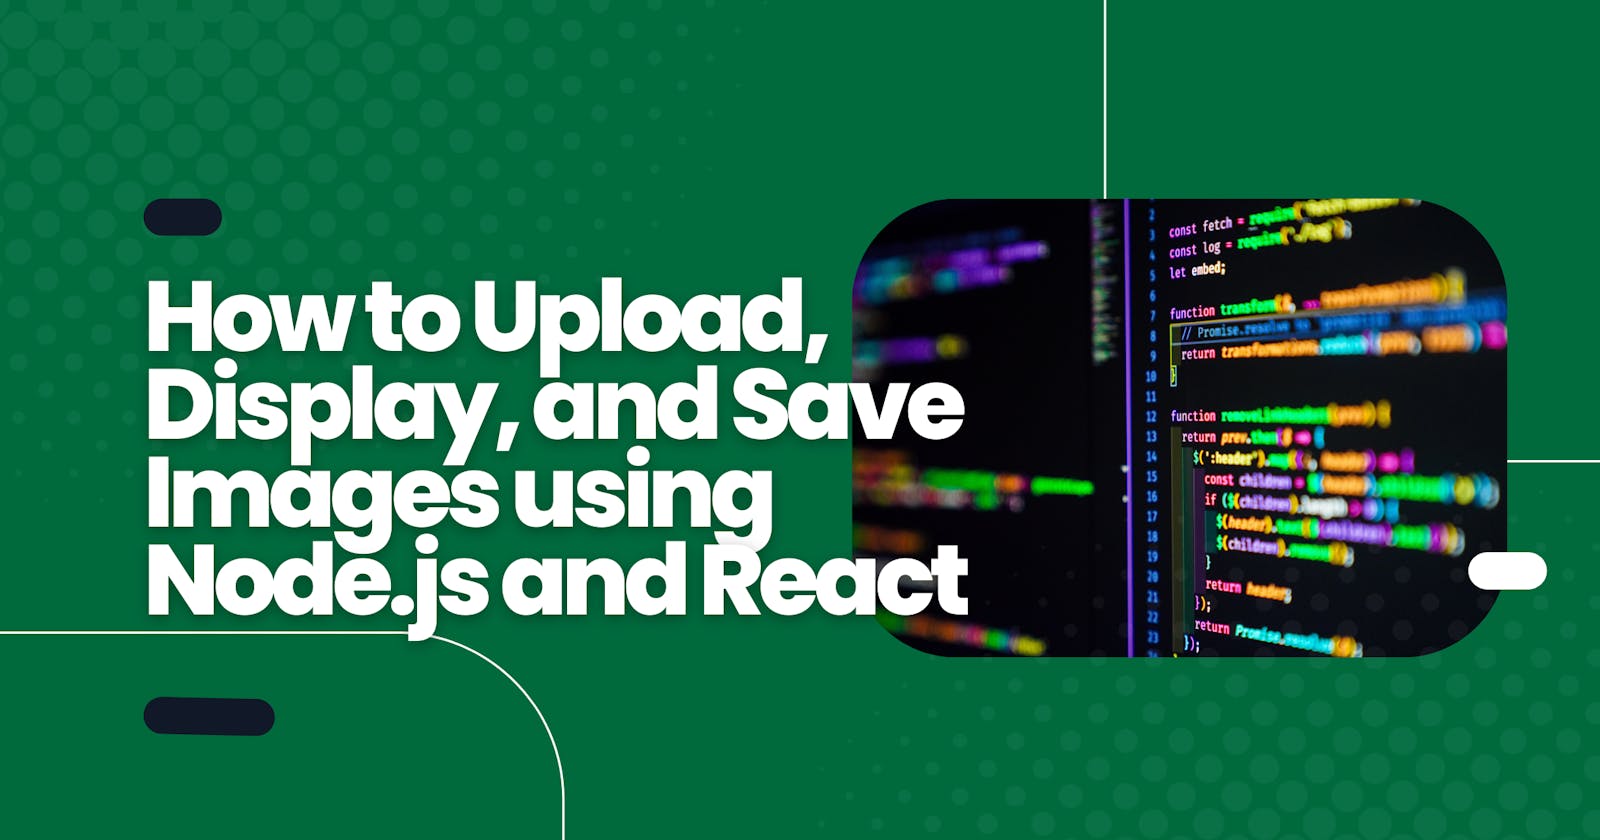 How to Upload, Display, and Save Images using Node.js and React